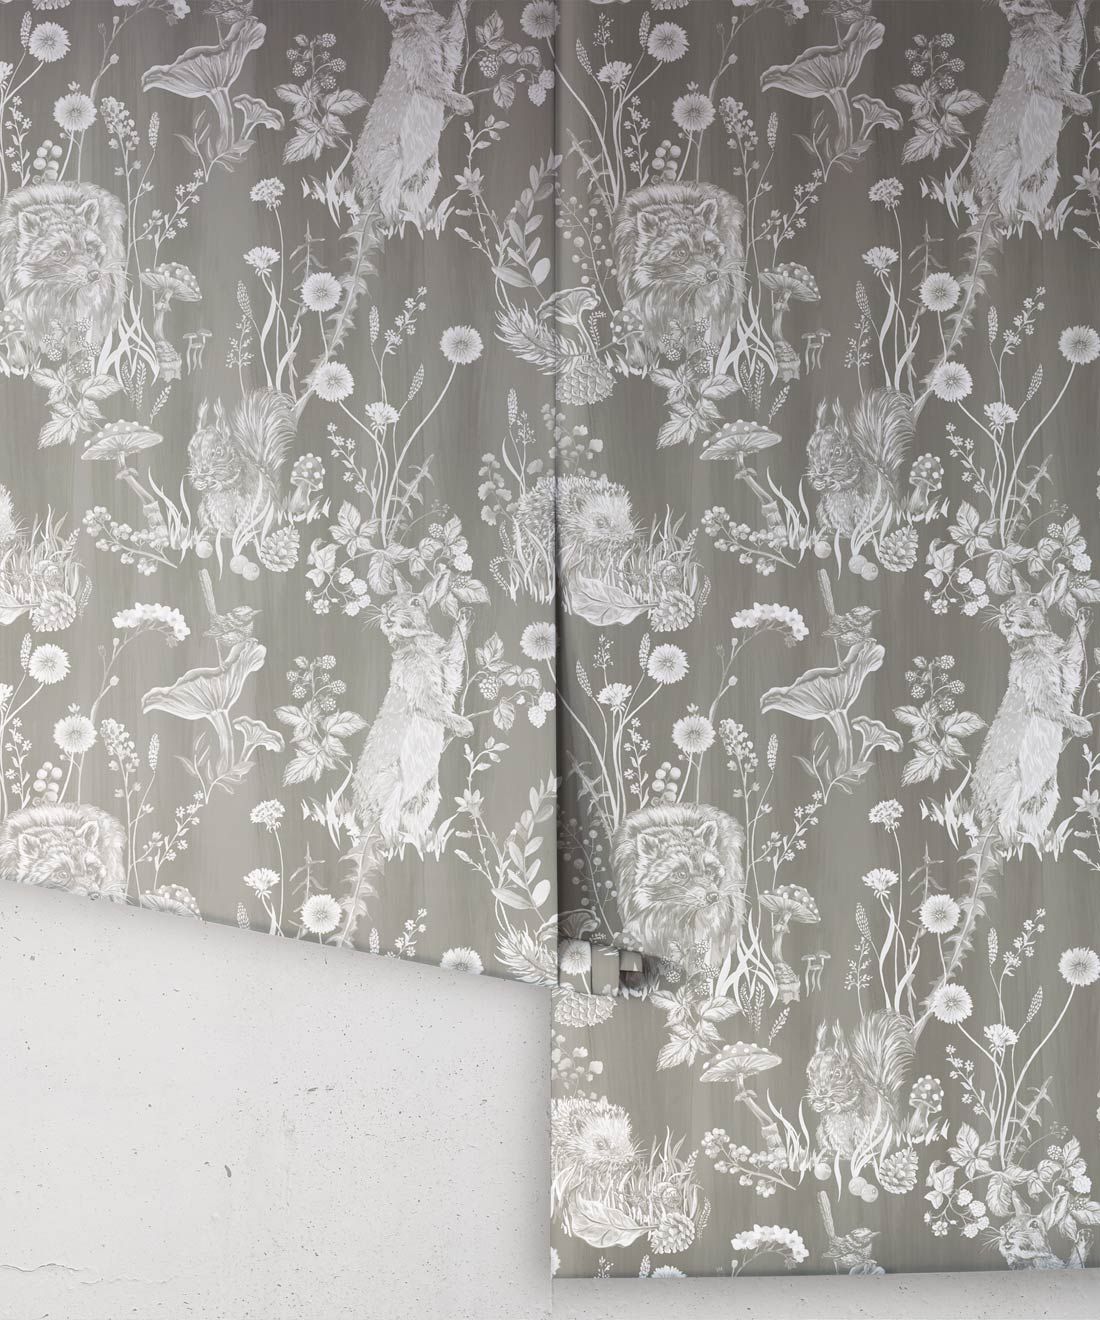 Woodland Friends Wallpaper • Forest Wallpaper with rabbits, hares, raccoons • Iryna Ruggeri • Grey • Rolls